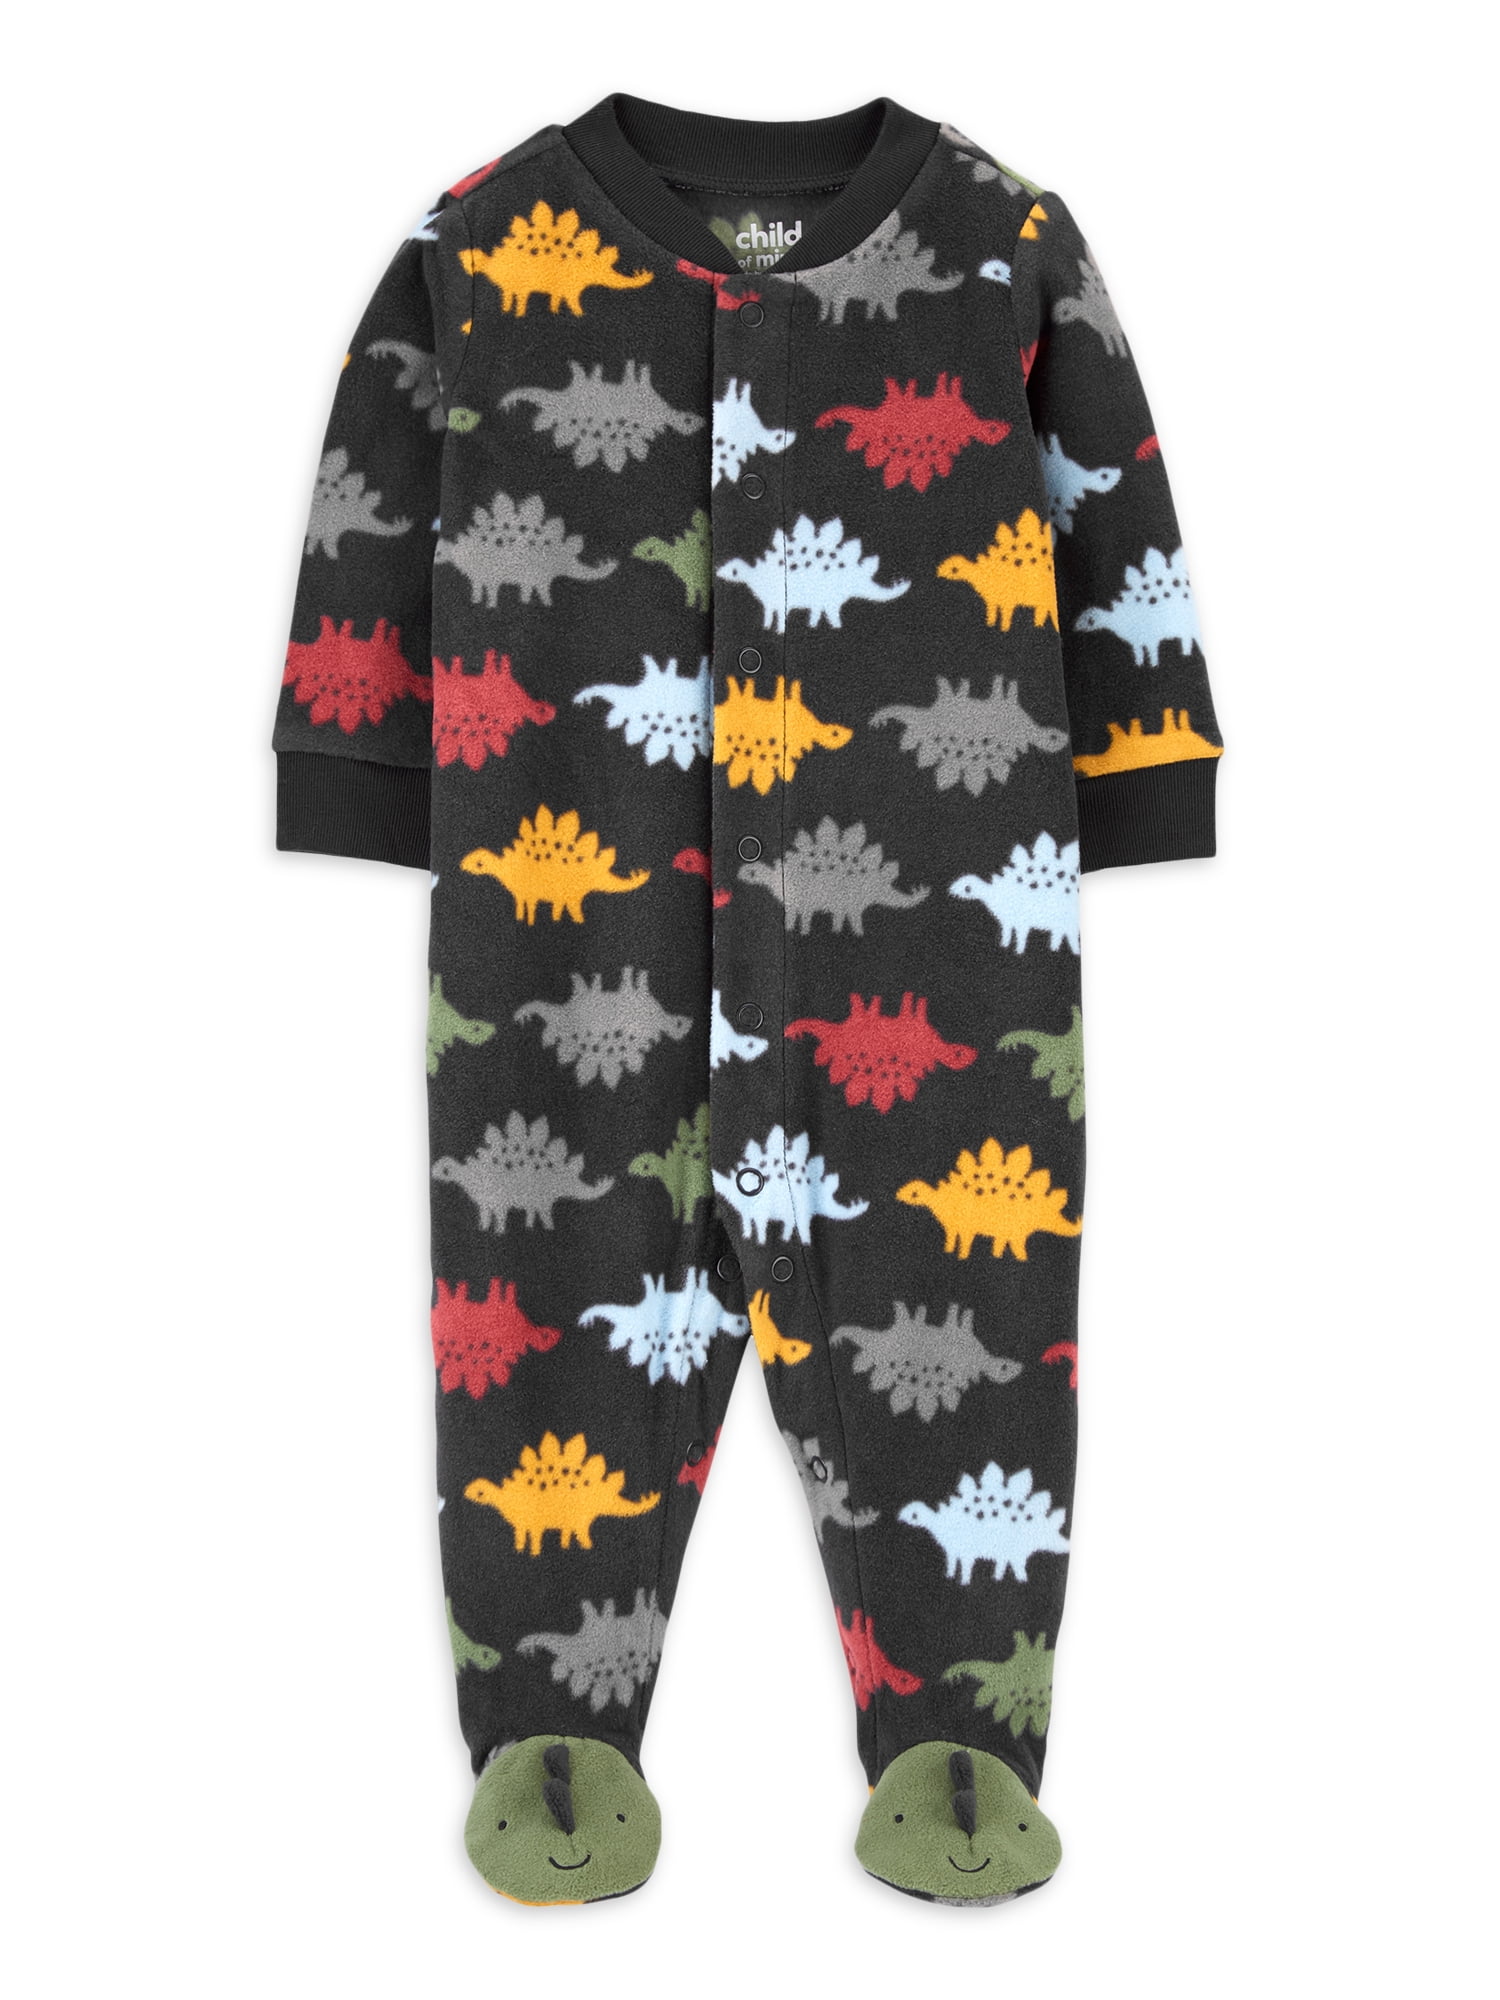 Carters Baby Boys Fleece Footed Pajamas Various Sizes Colors 